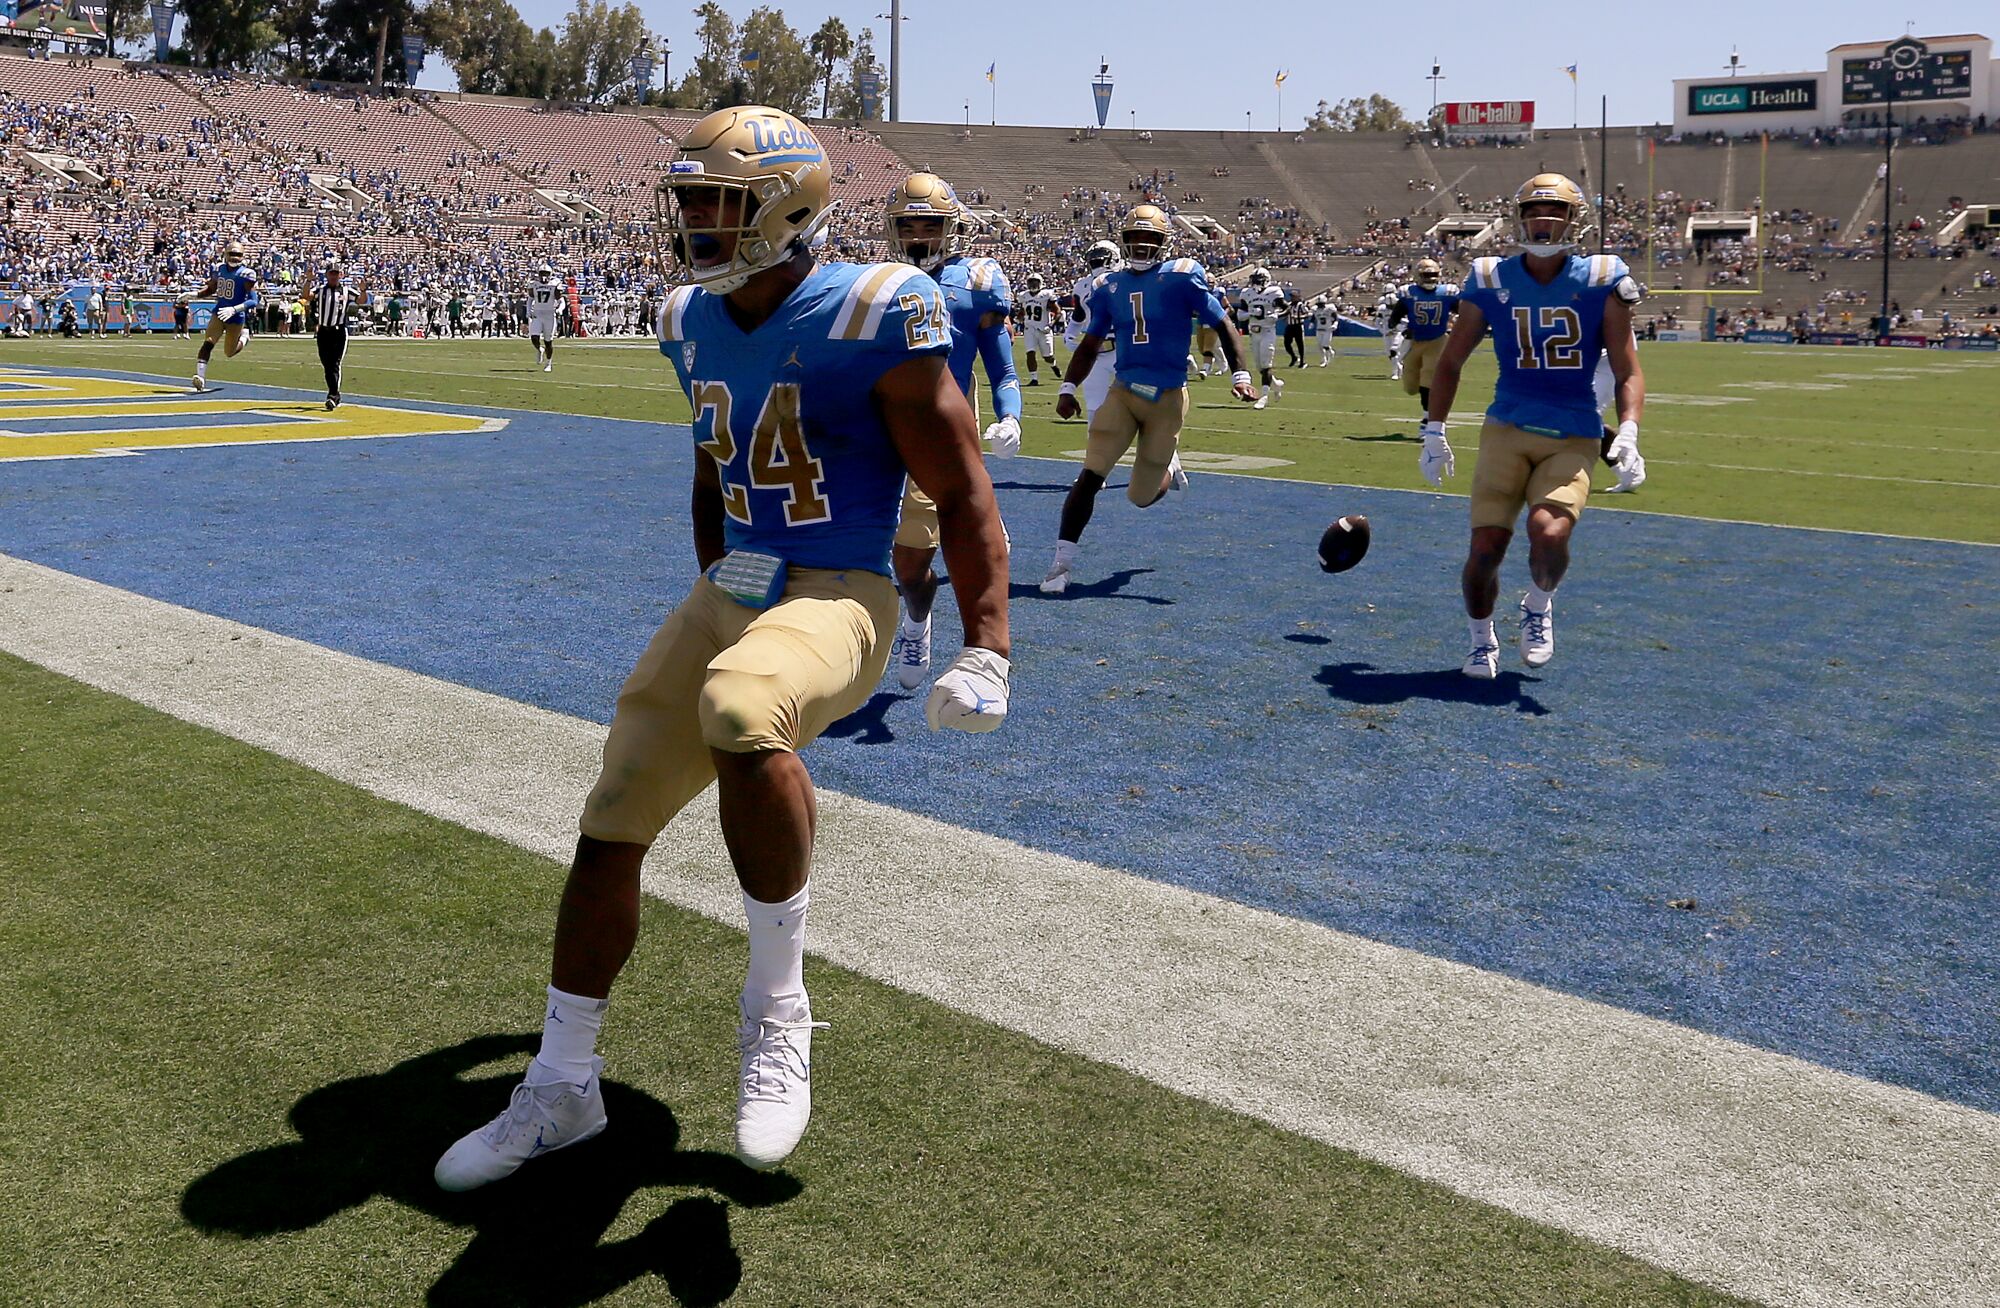 UCLA running back Zach Charbonnet celebrates after scoring a touchdown against Hawaii in the Rose Bowl.